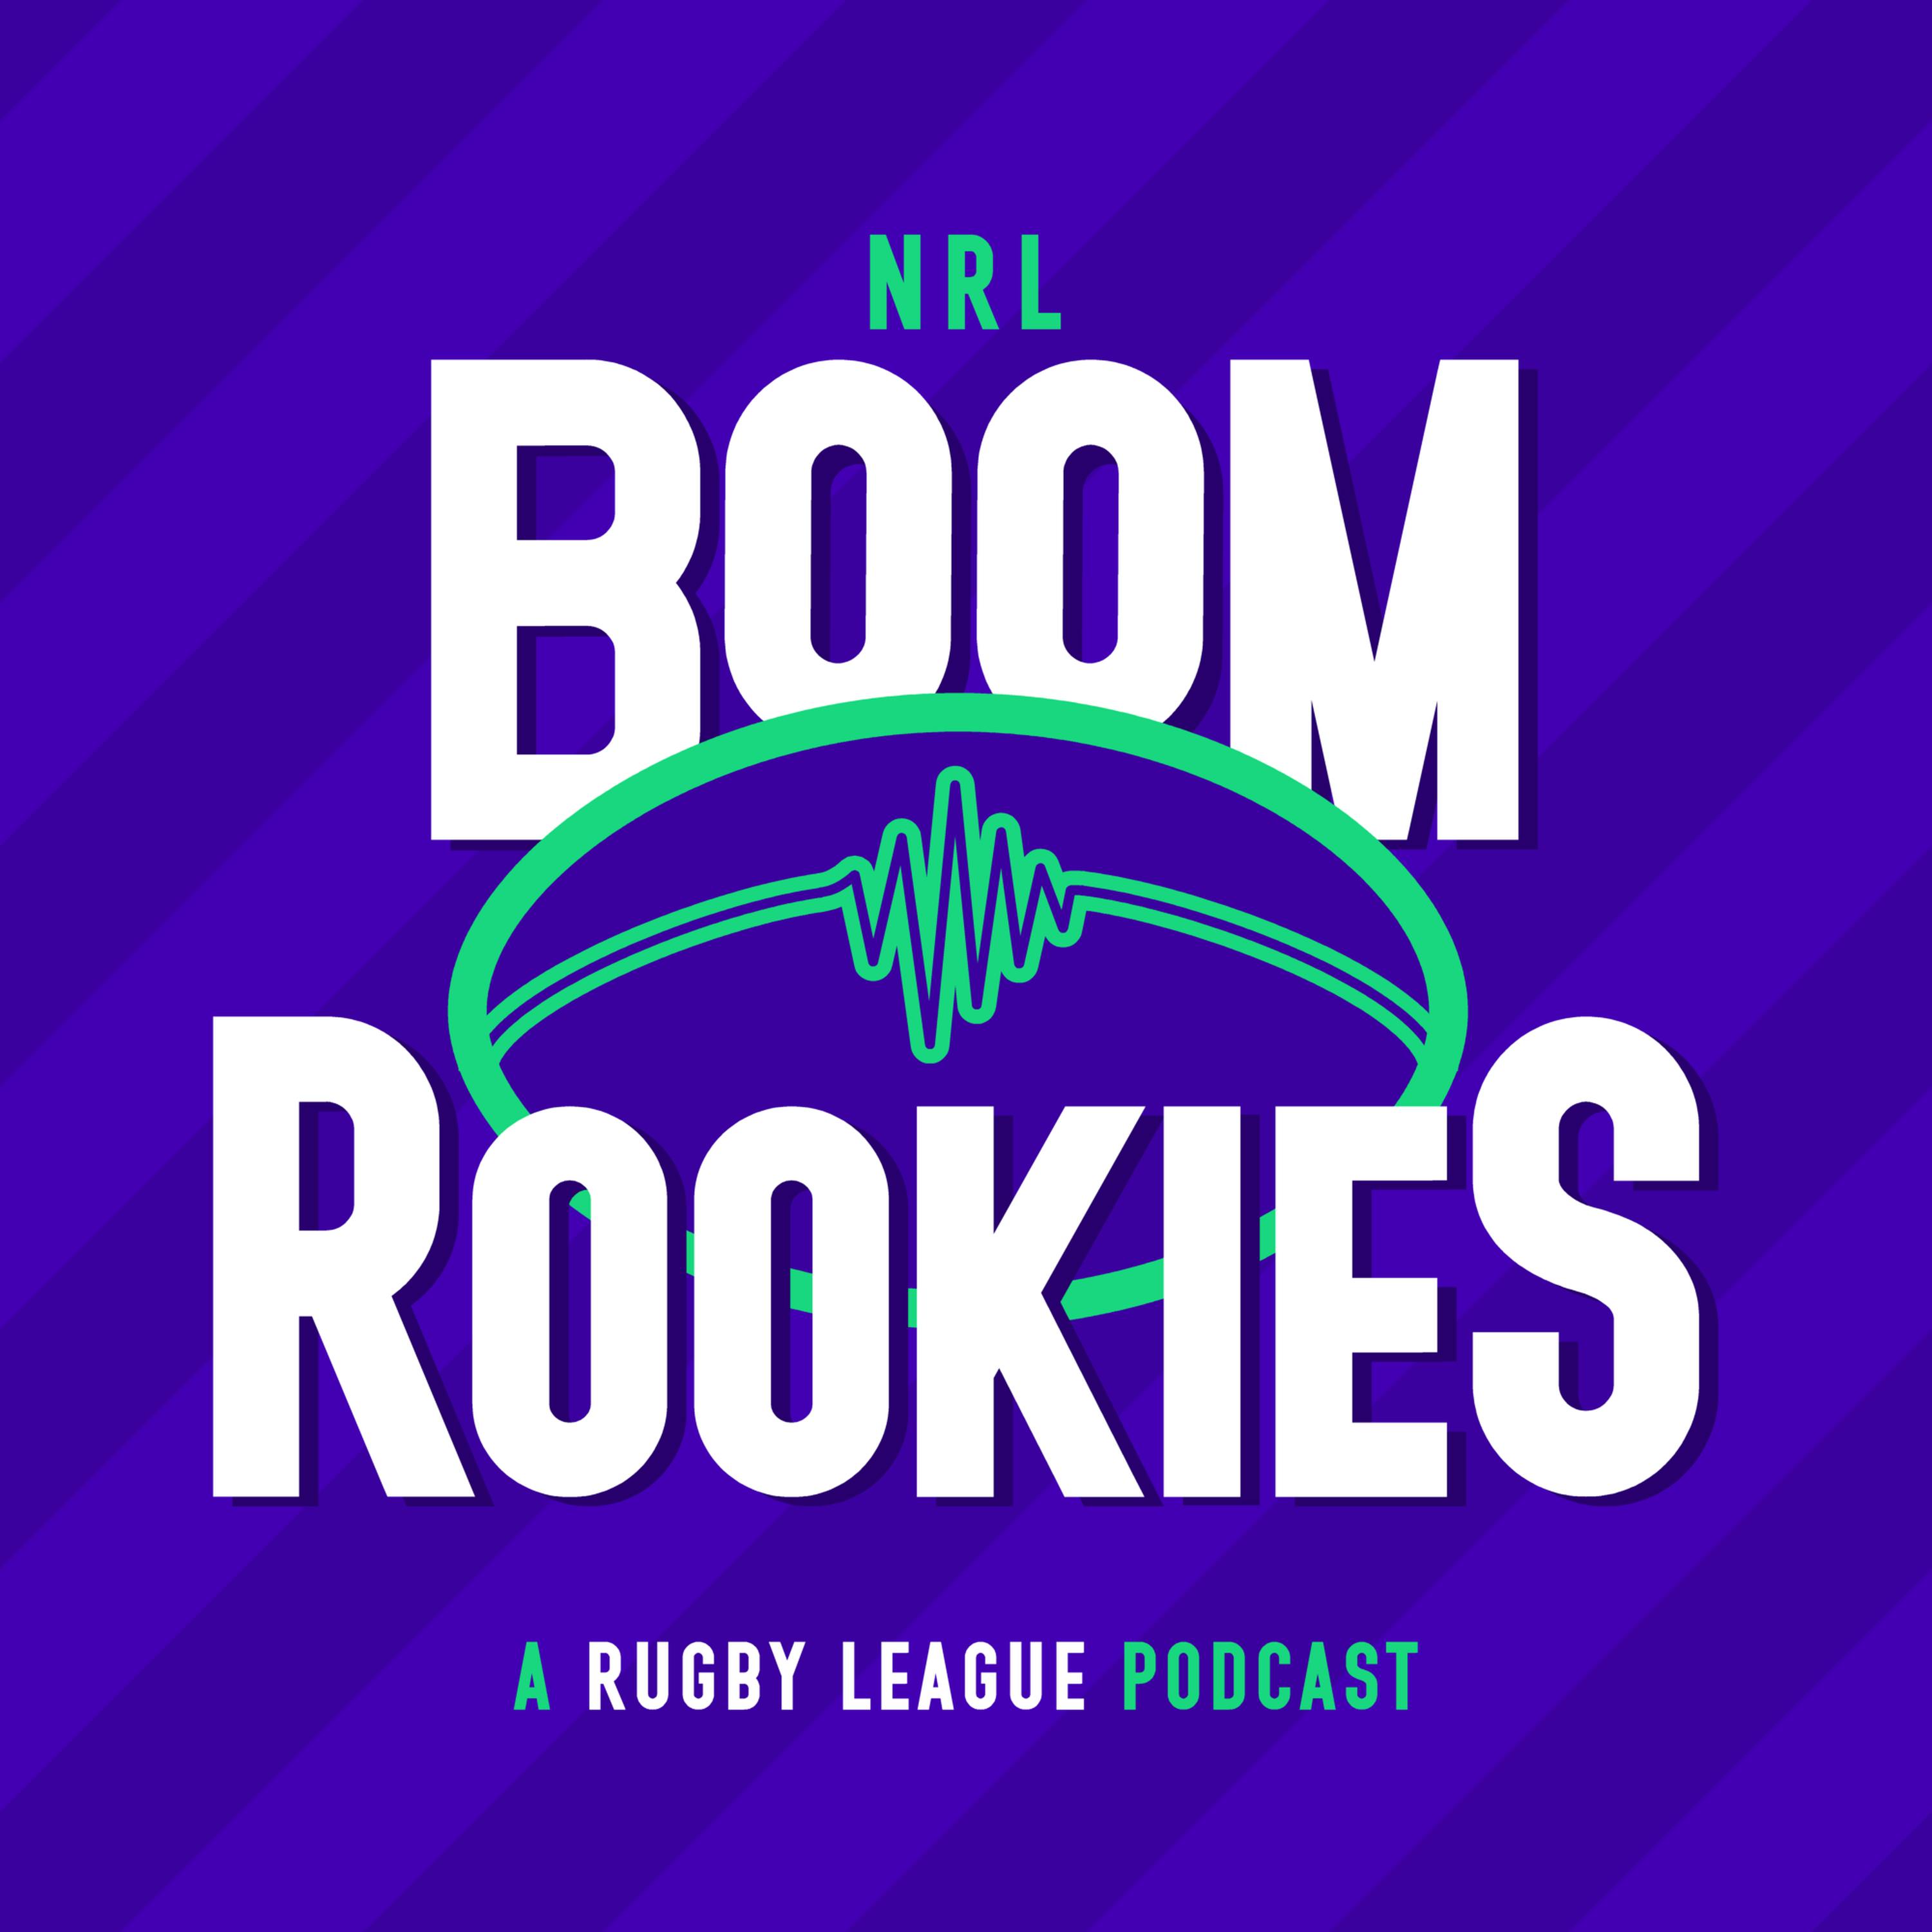 2021 NRL Season Previews - Sydney Roosters ft. Dean Rob